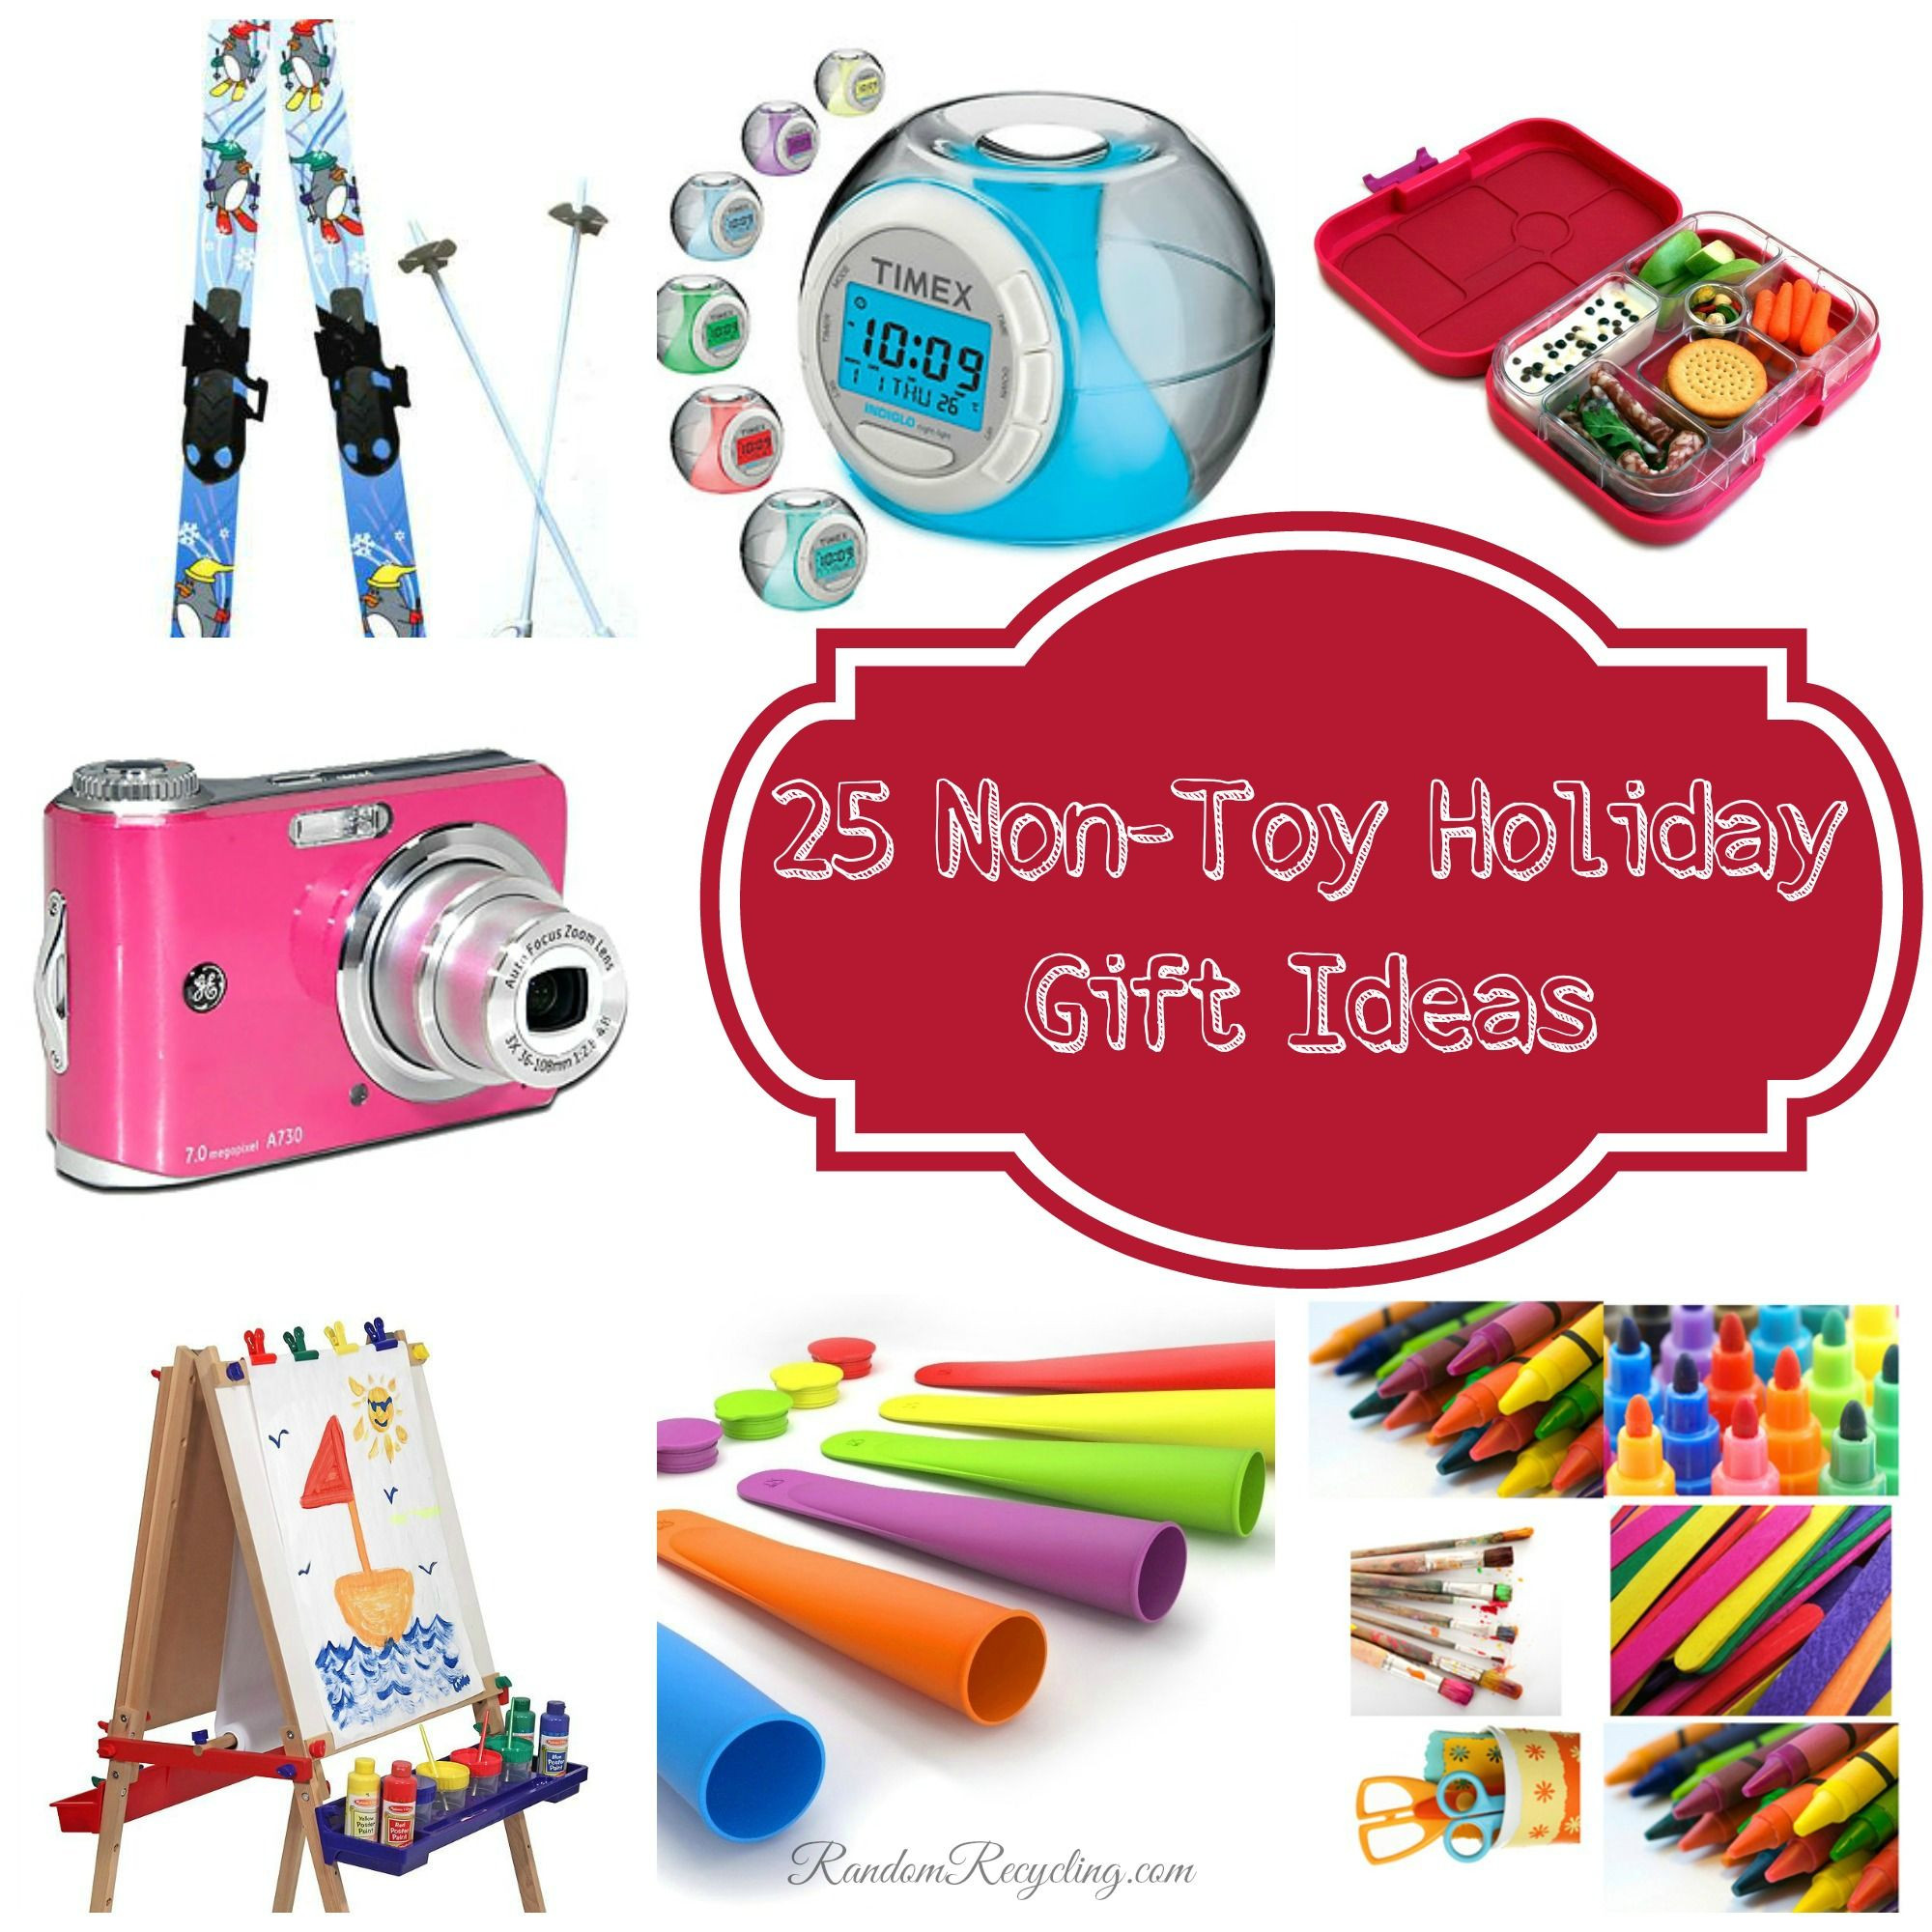 Non Toy Gift Ideas For Kids
 25 Non Toy Gift Ideas for the Holidays